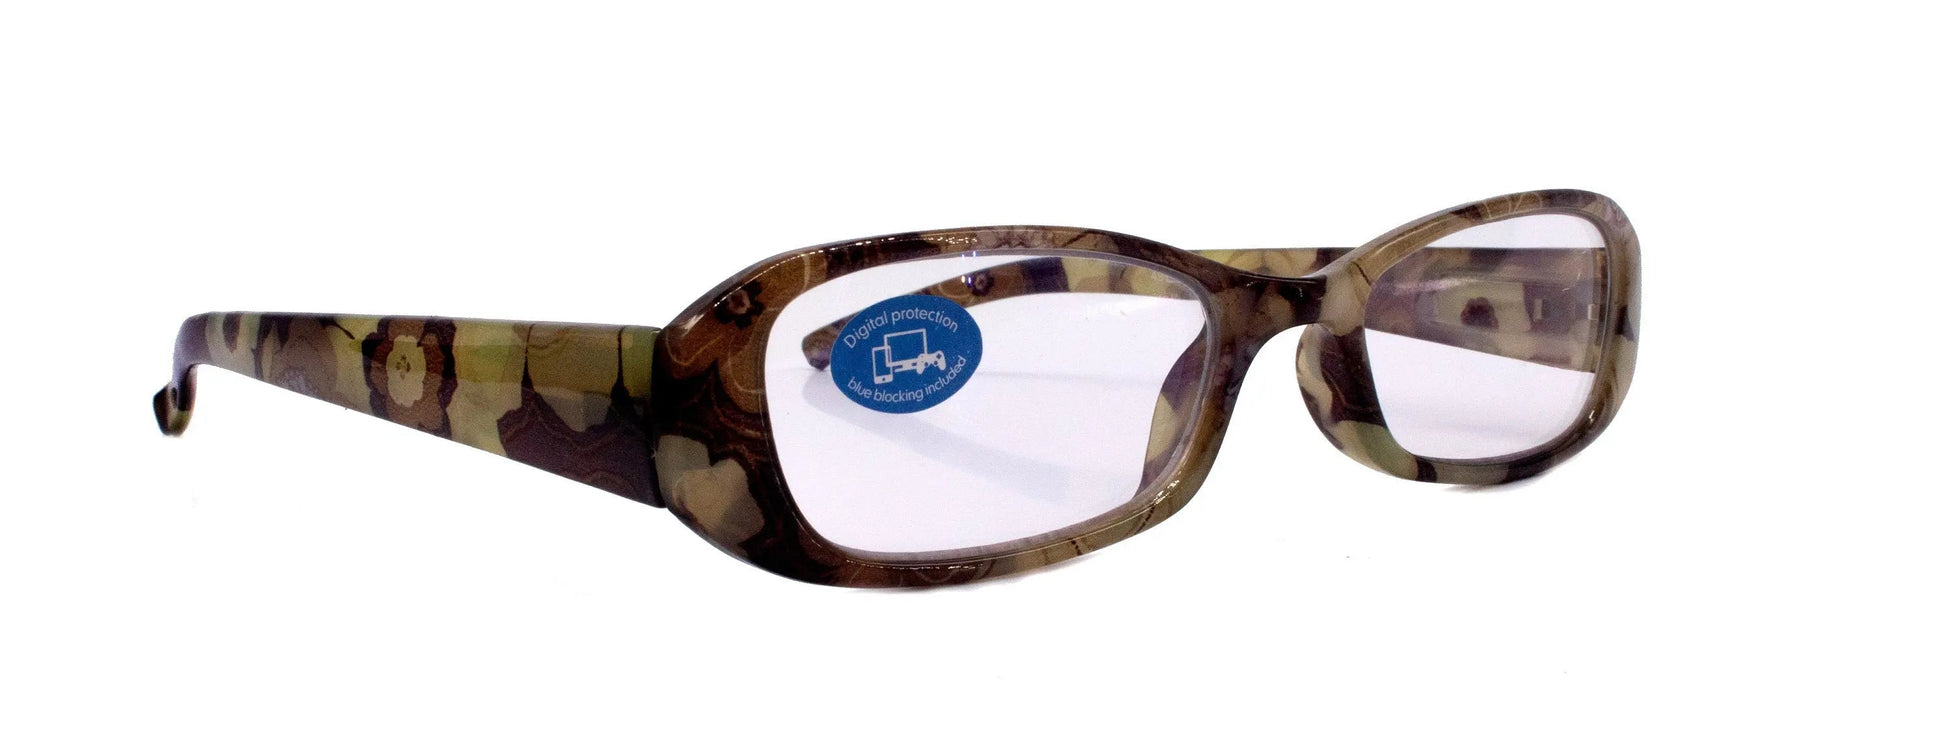 Blossom, (Blue Light Blocker) w AR Coating (ABrown Floral, Rectangular) Reading Glasses, No RX, Gamers NY Fifth Avenue 